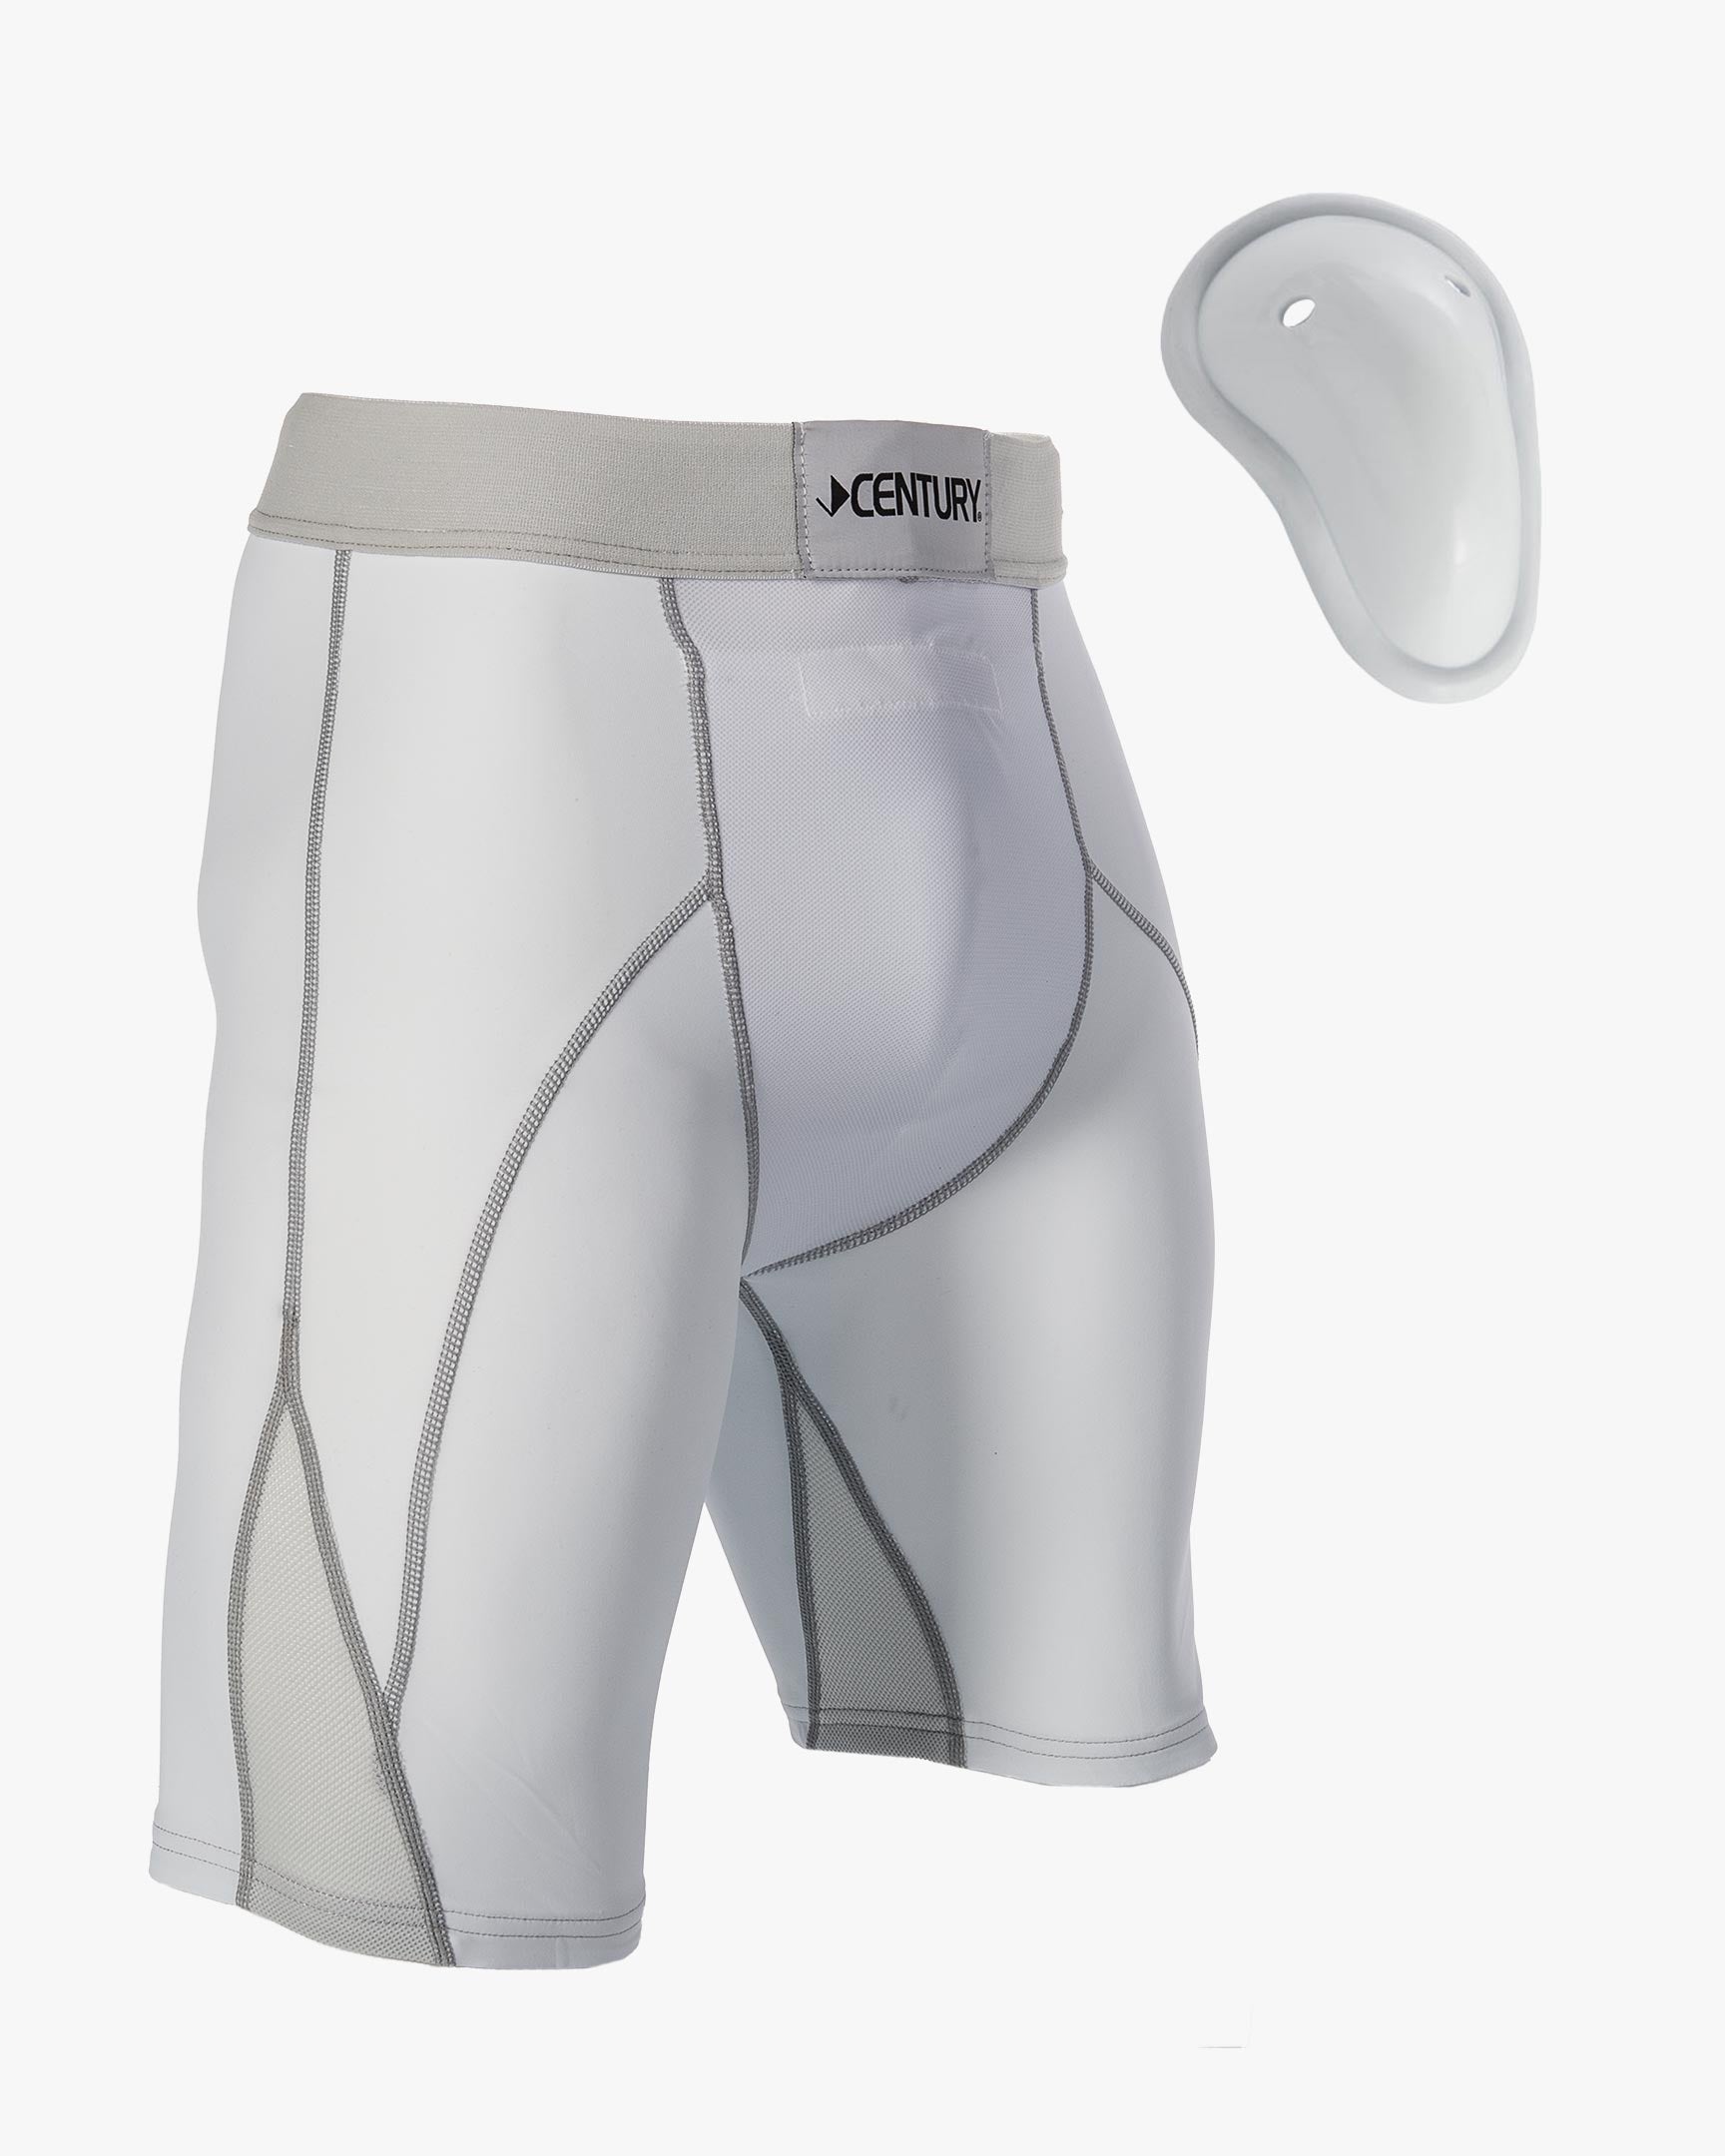 Compression Shorts w/ Cup – Century Kickboxing